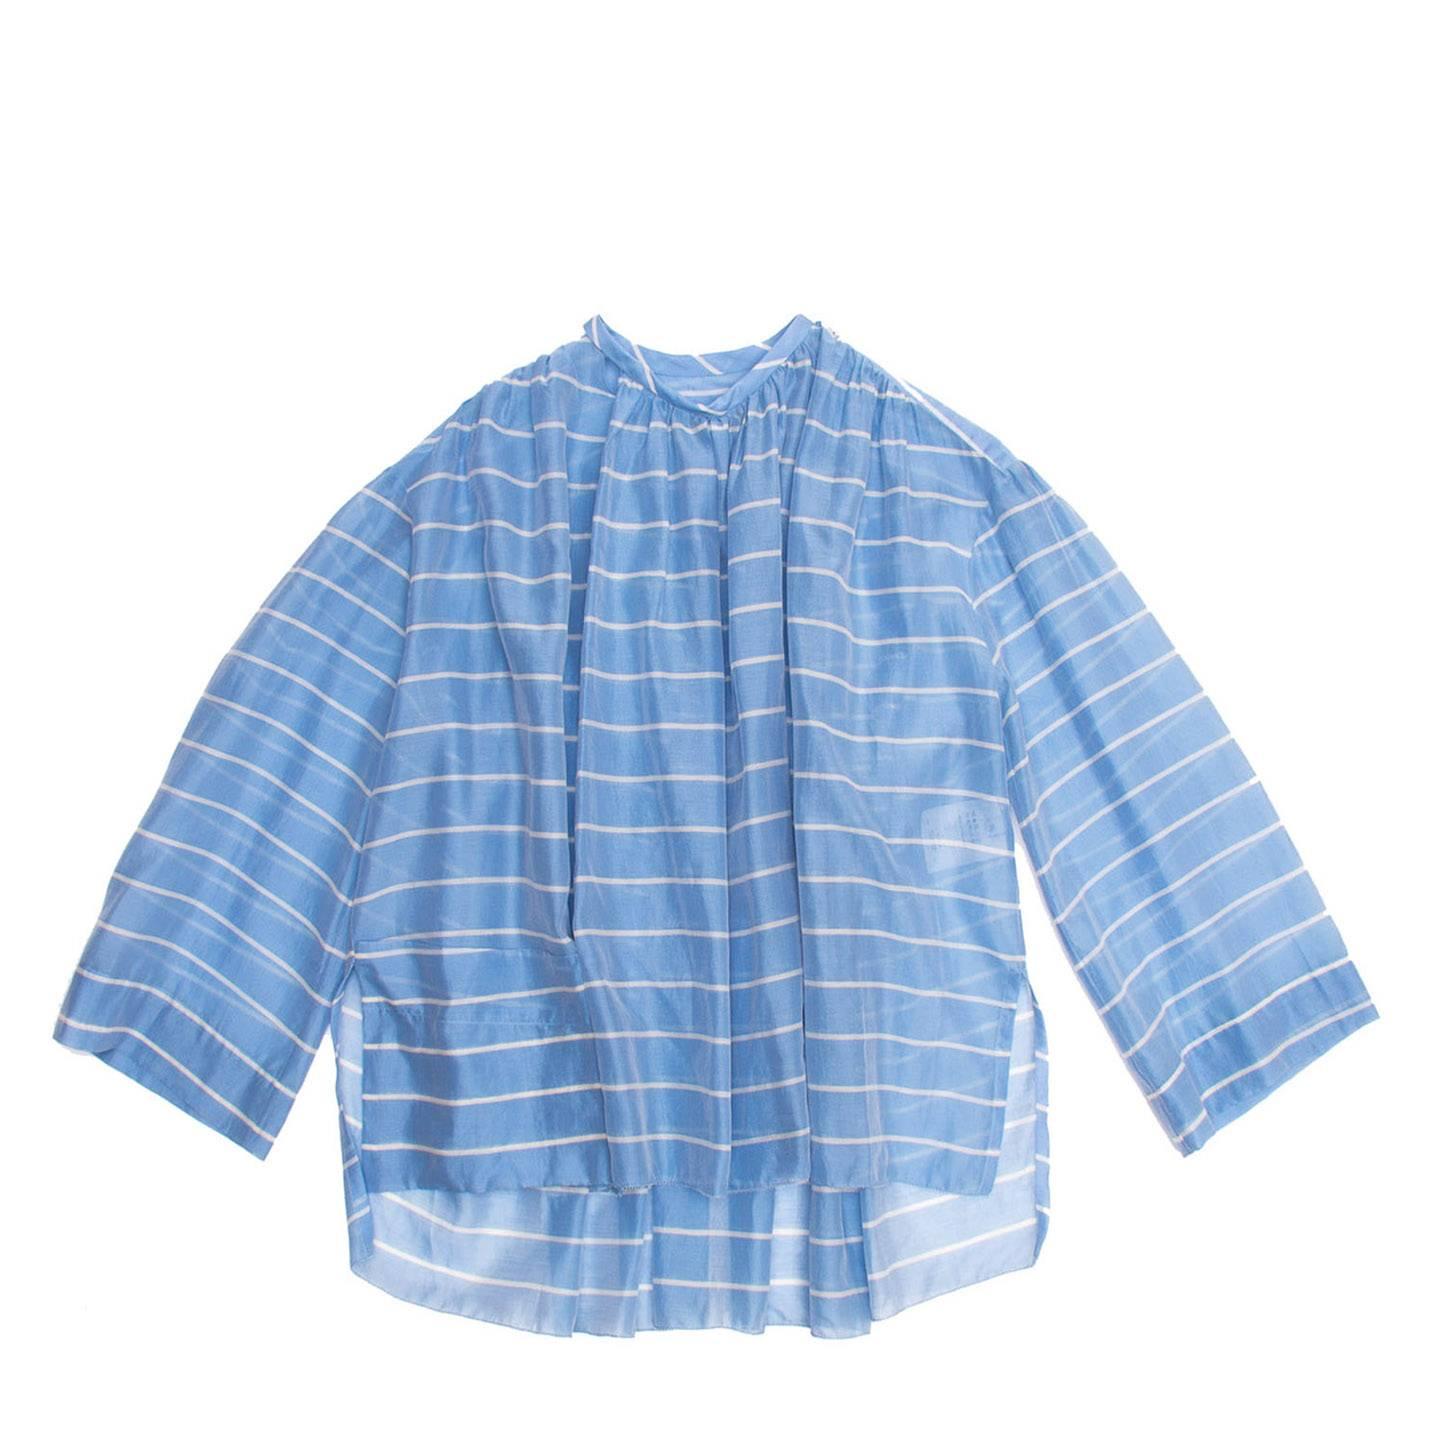 Cotton/silk sheer sky blue and white striped cropped tunic top with round neck and 3/4 sleeves. The front panel is gathered around the front collar and shoulder, the back is gathered on the yoke creating a wider volume at hem. The sleeves are